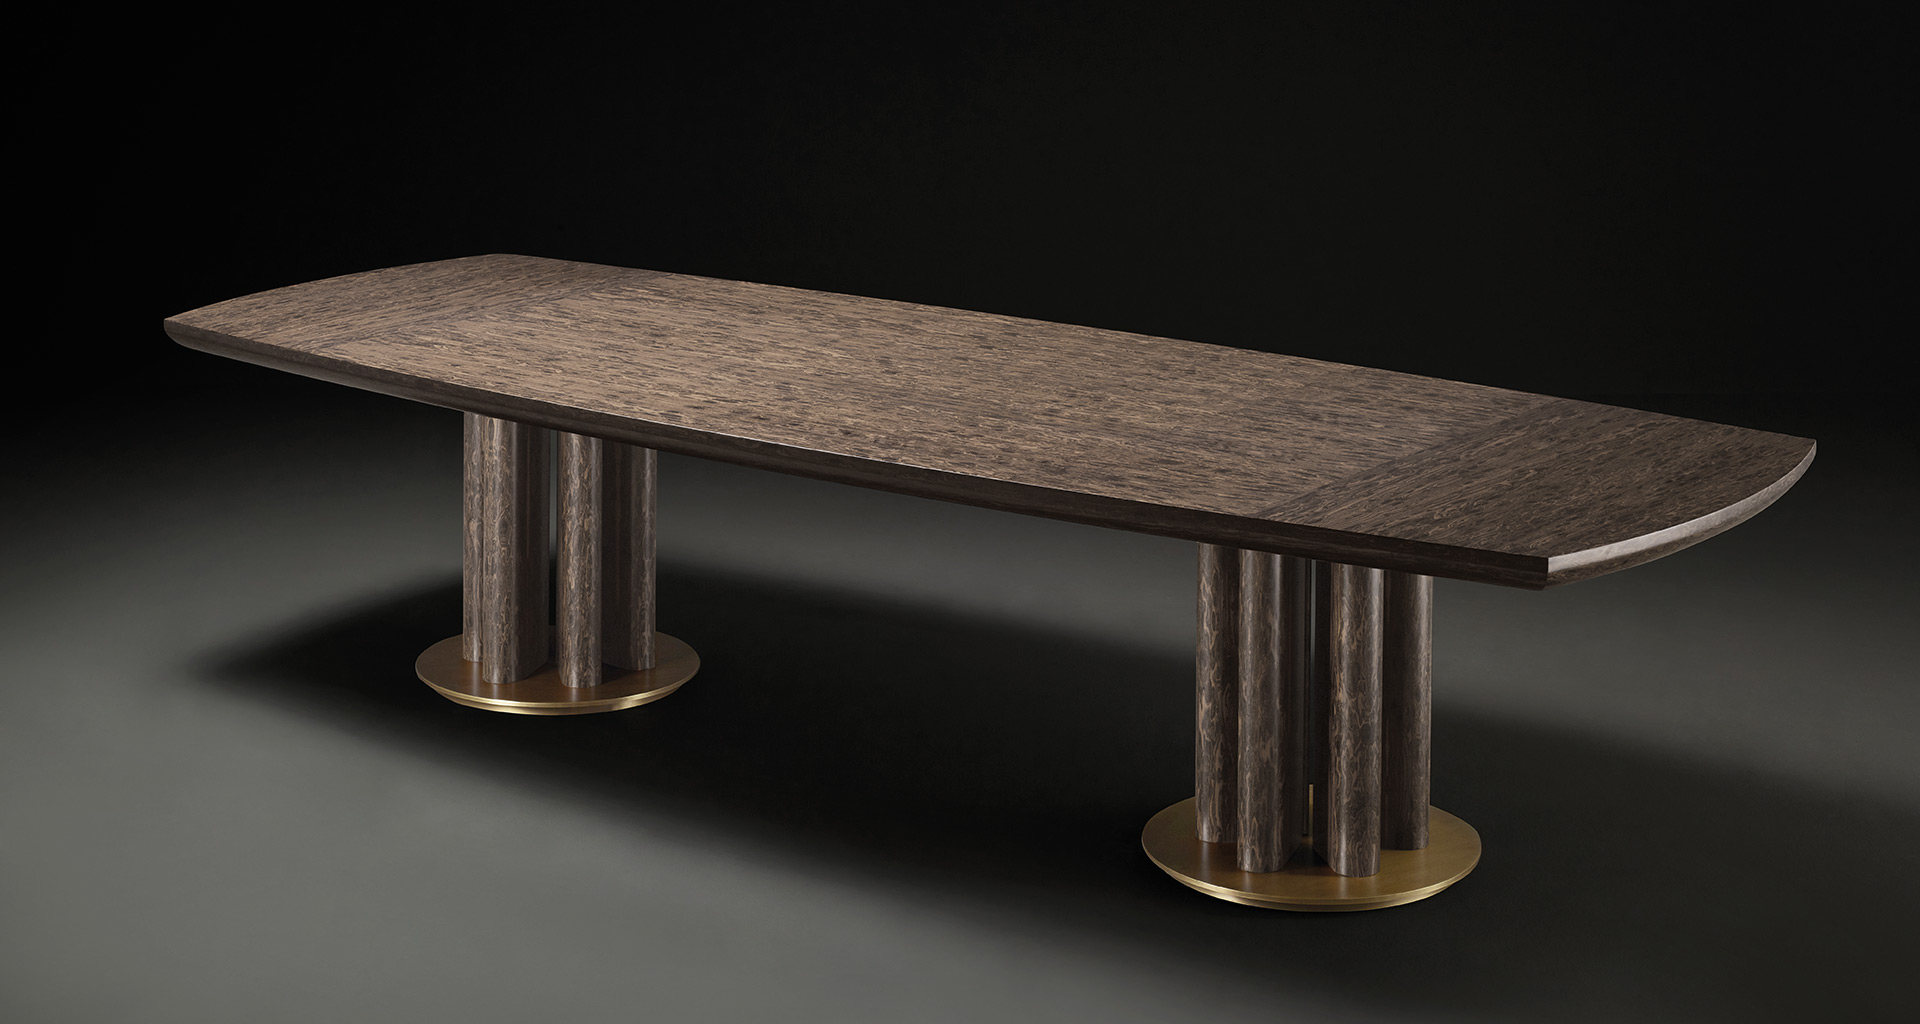 Orazio is a wooden and bronze dining table, from Promemoria's Amaranthine Tales collection | Promemoria